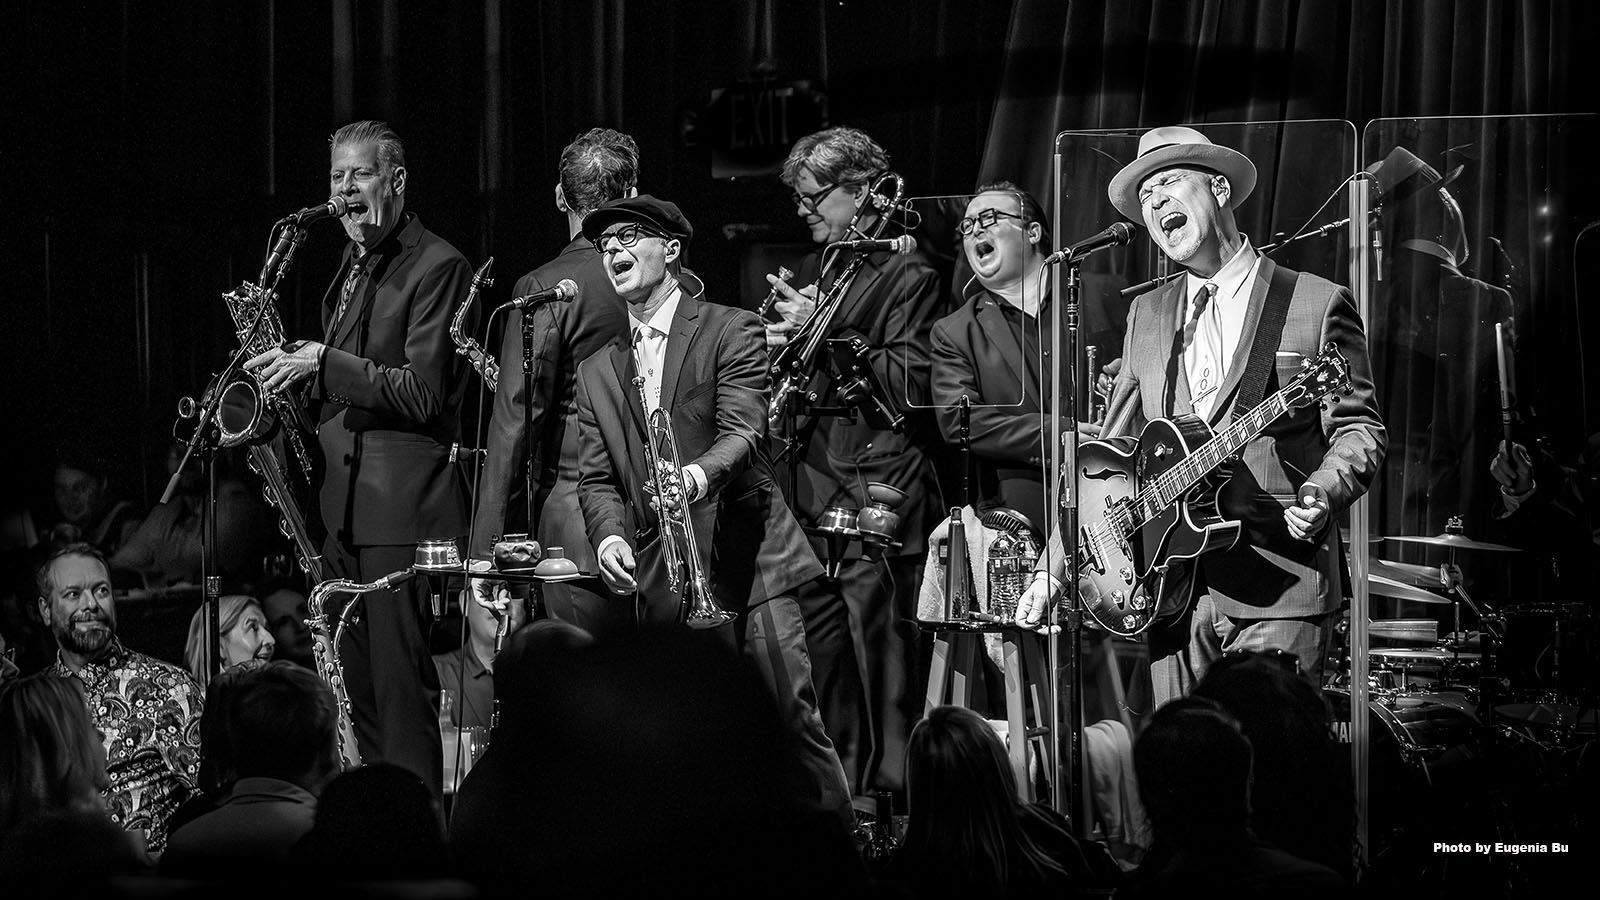 Big Bad Voodoo Daddy will bring their unique style of swing to The Clyde Theatre on Friday, Sept. 22.